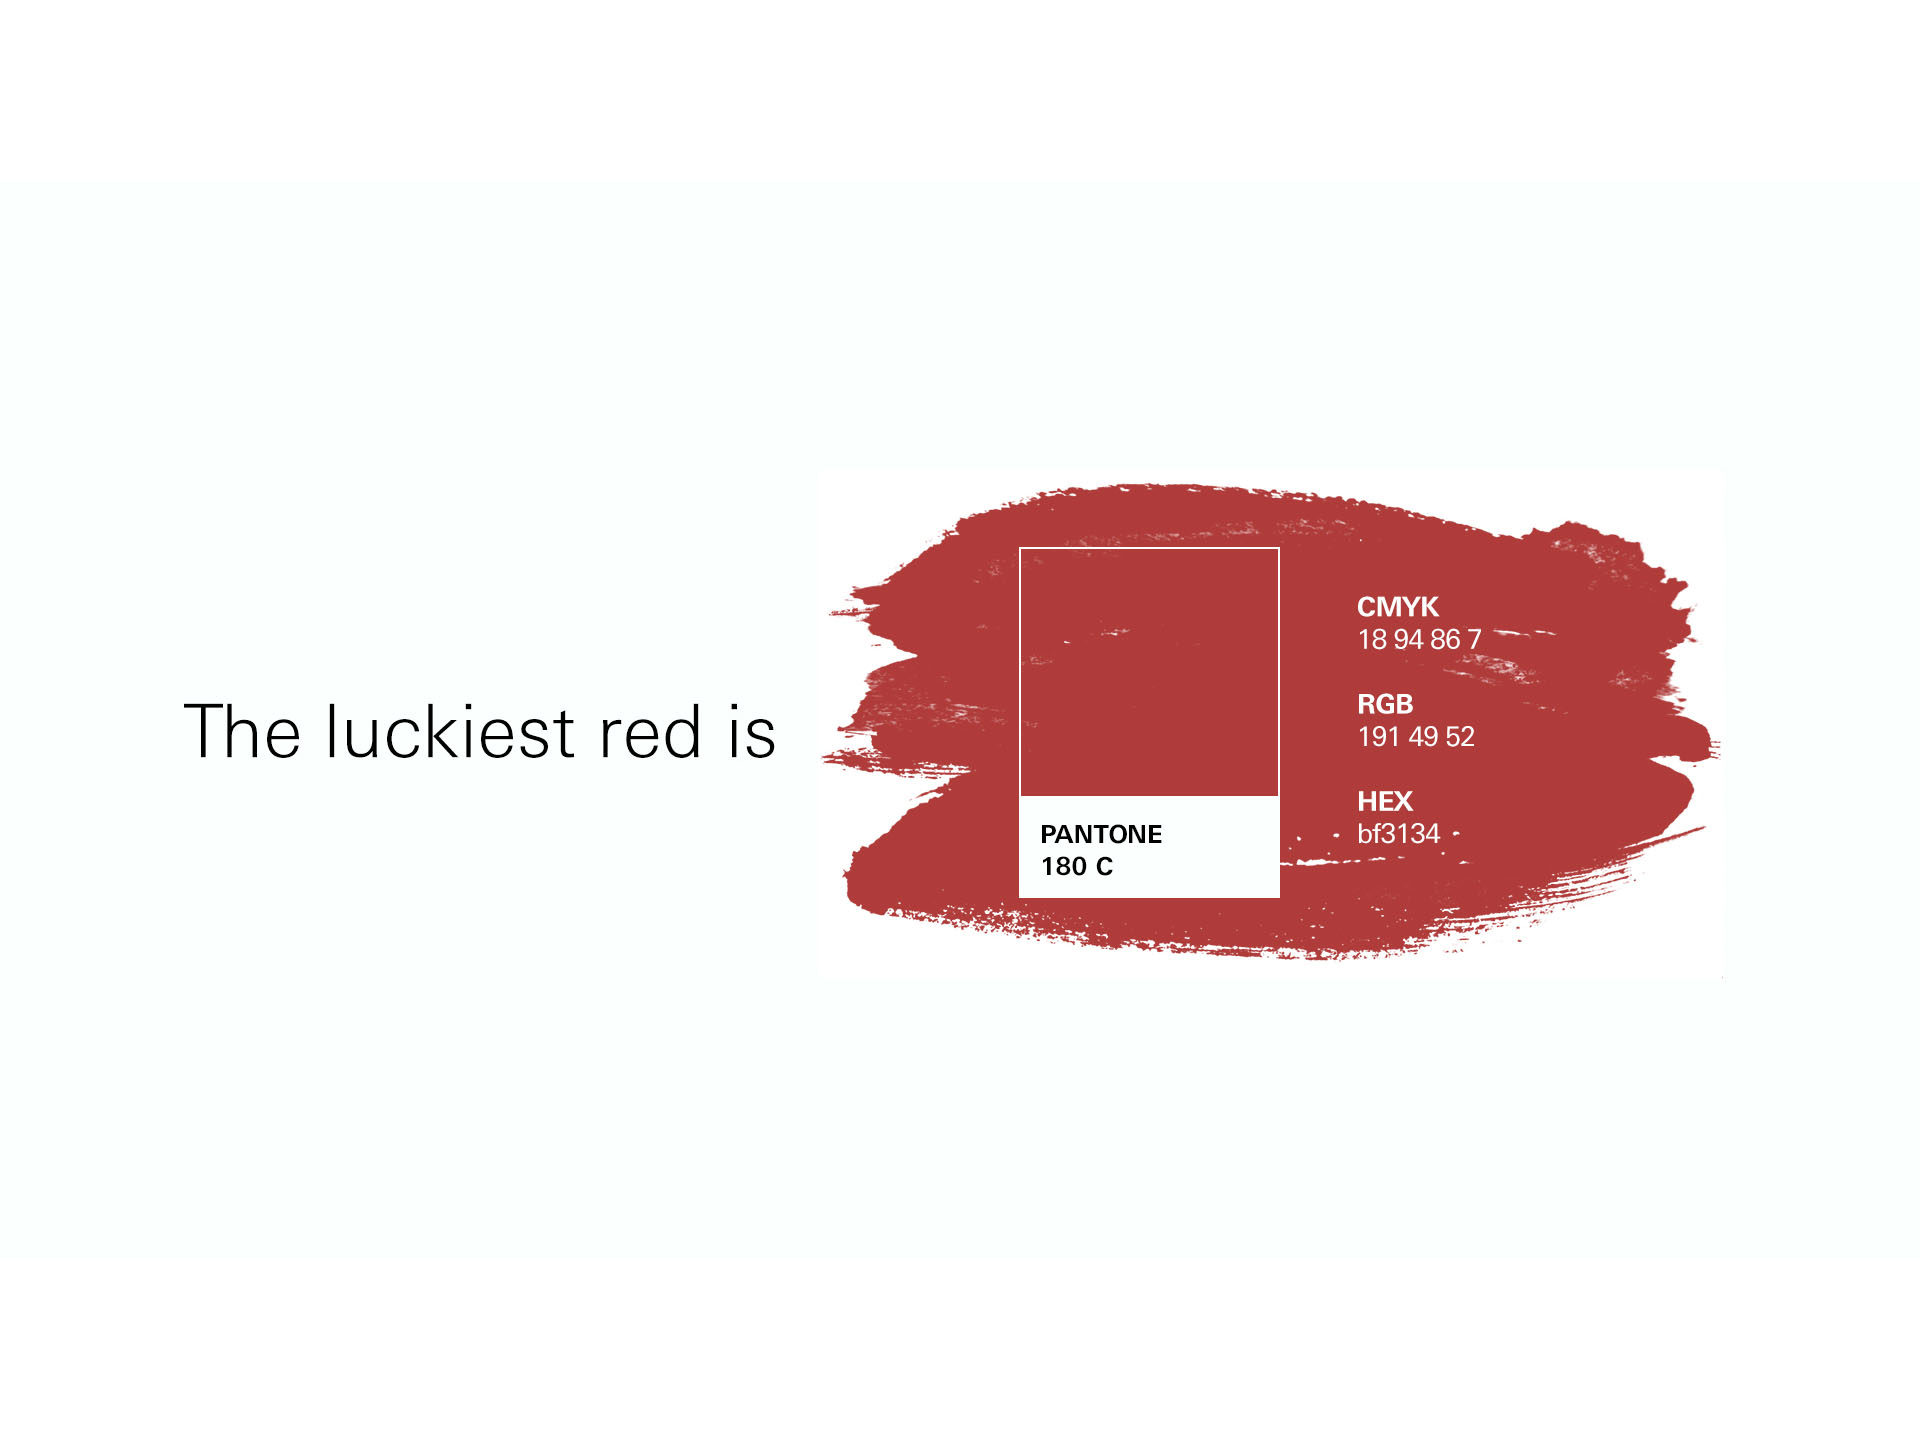 HSBC Bank USA Finds “The Luckiest Red” just in time for Lunar New Year